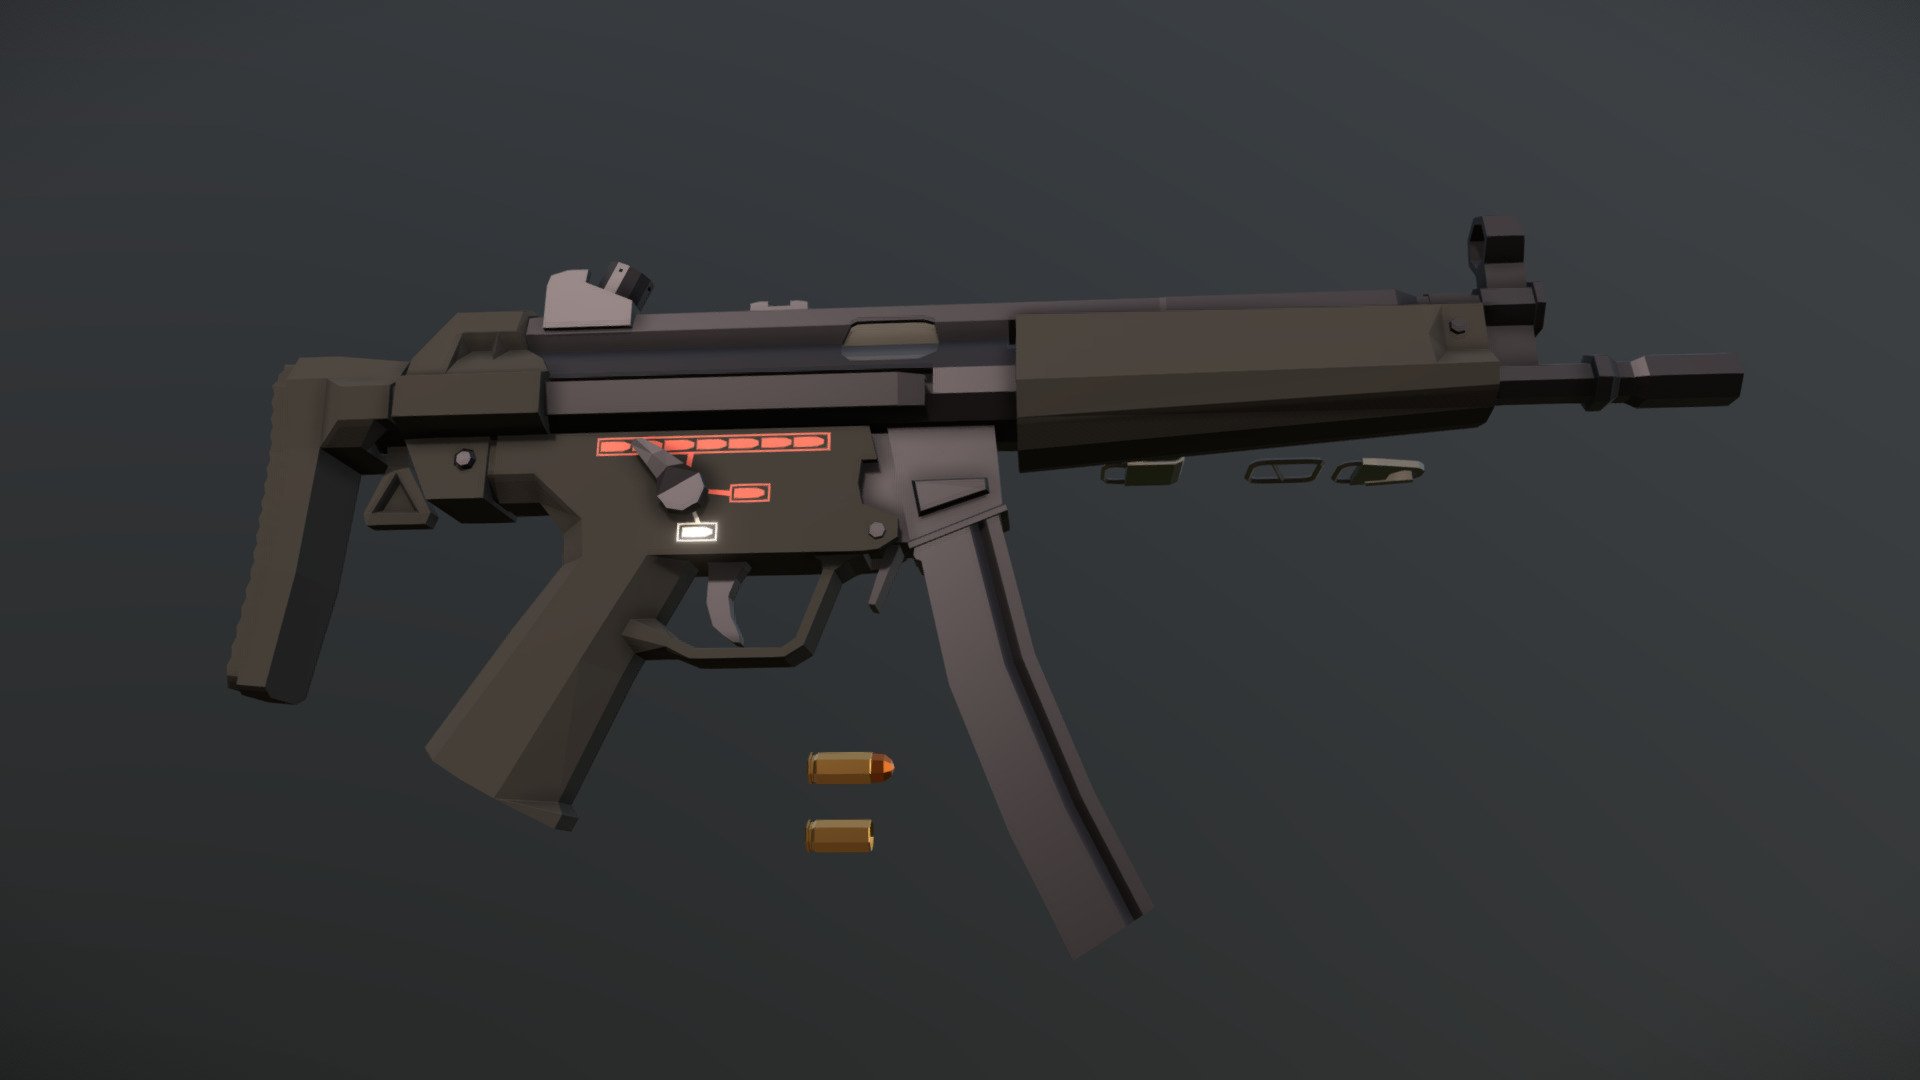 Low-Poly model of the well known H&amp;K MP5, with collapsible stock, and metal components of three-point sling included. the MP5 is preferred by the SAS in this setup, as a technique known as &ldquo;sling tension aiming